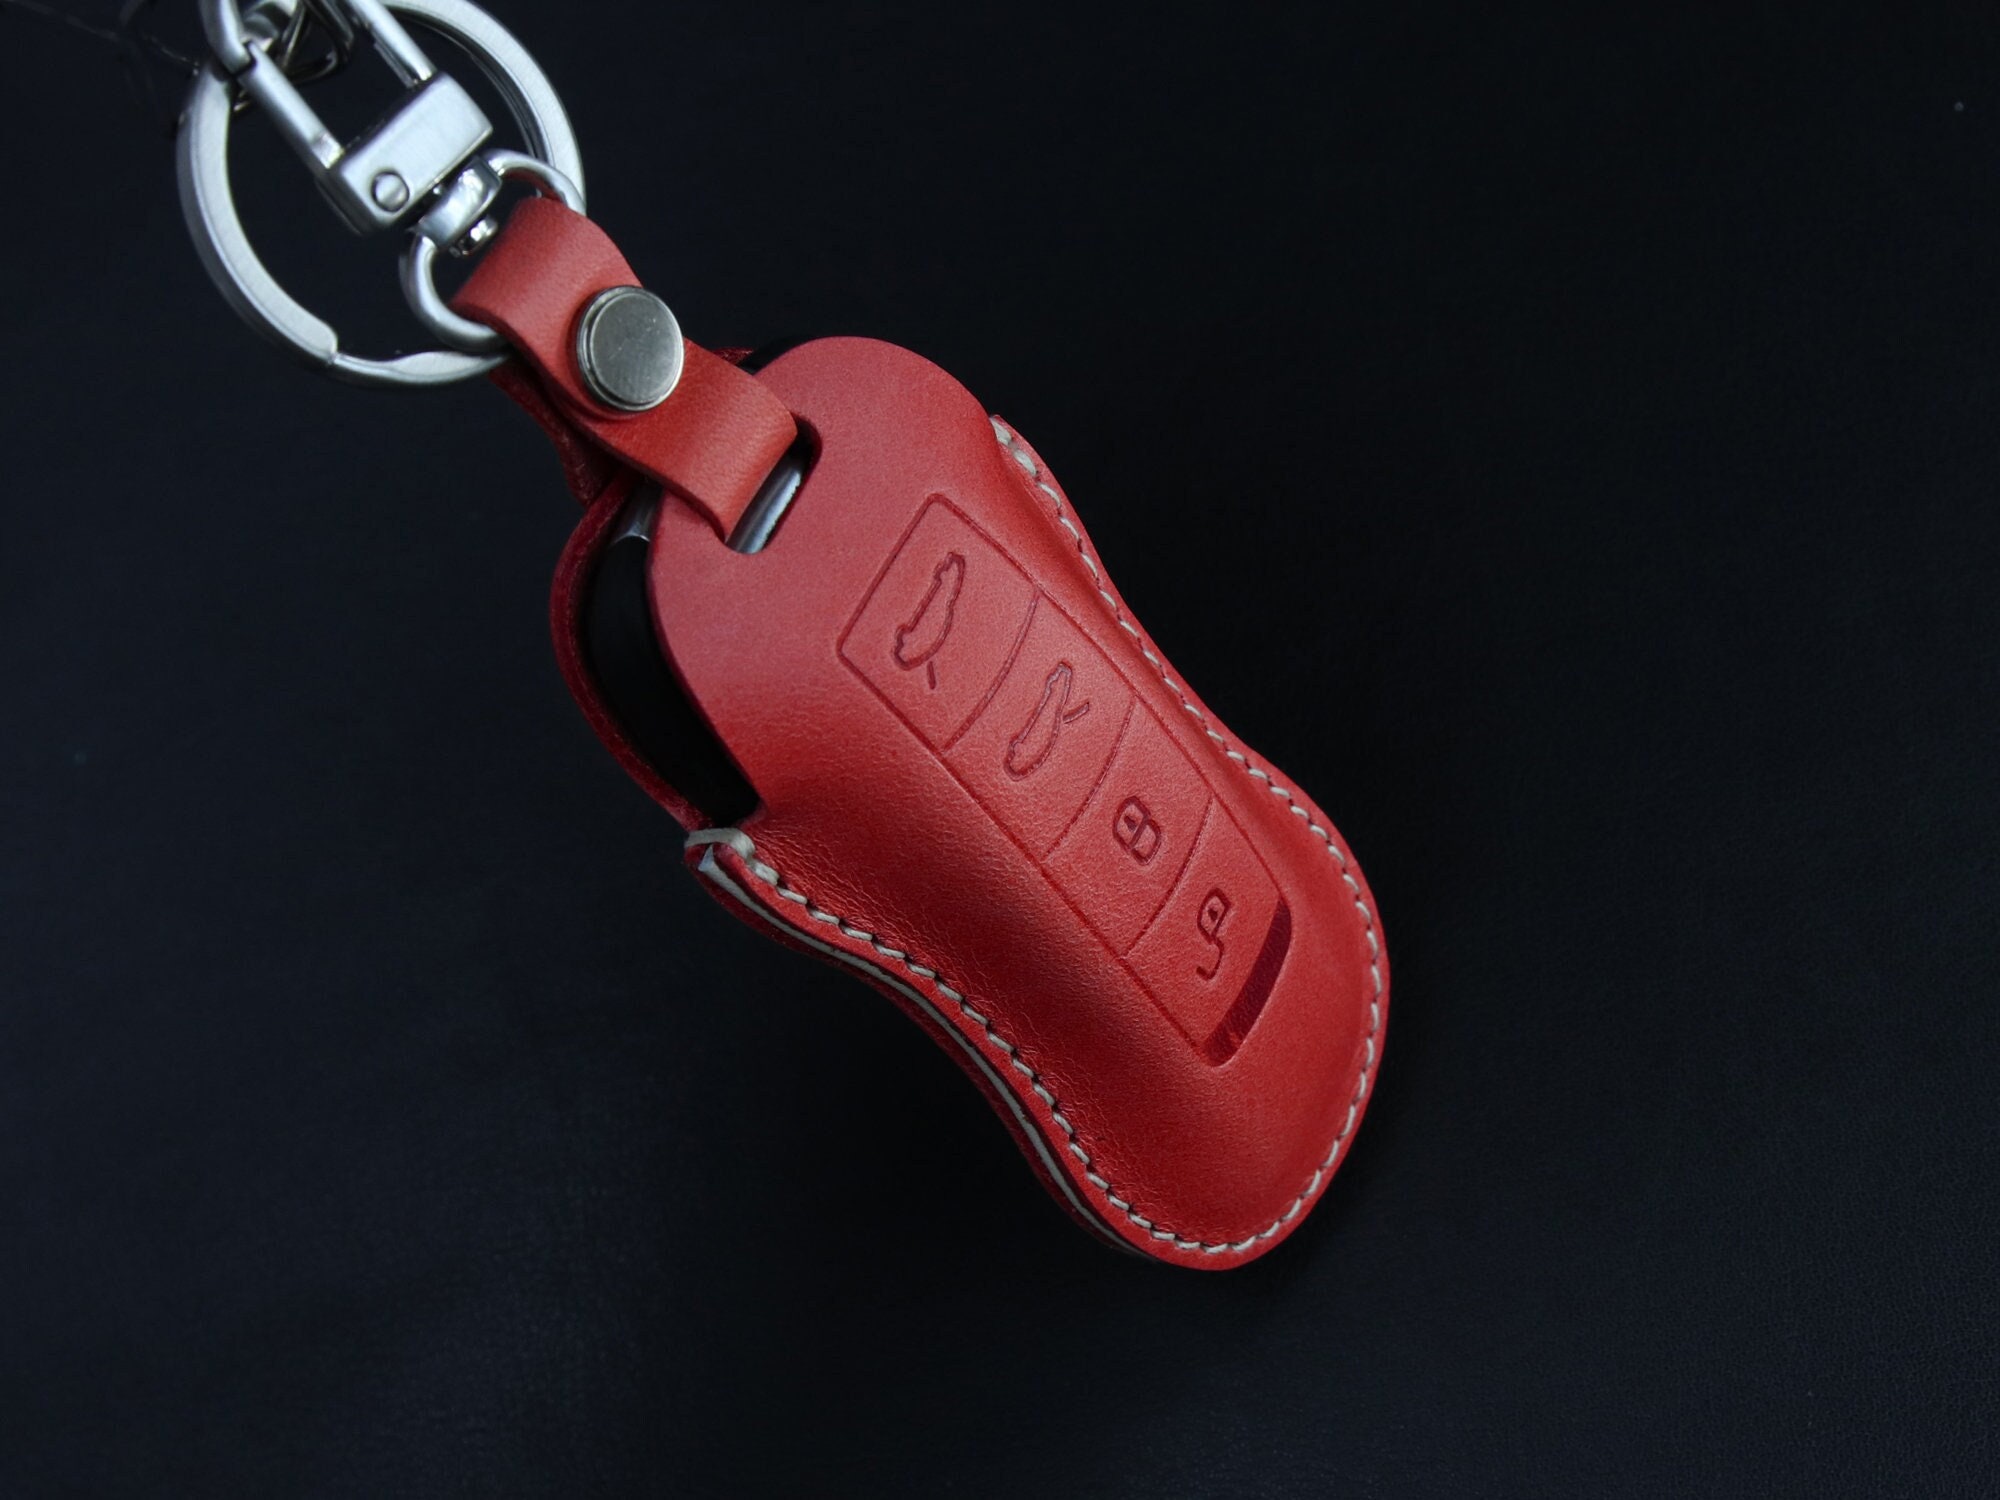 SANRILY Full Protector for Porsche Key Cover Plating Key Fob Case Shell  with Keychain Keyless for Porsche 911 Macan Cayenne Panamera,718